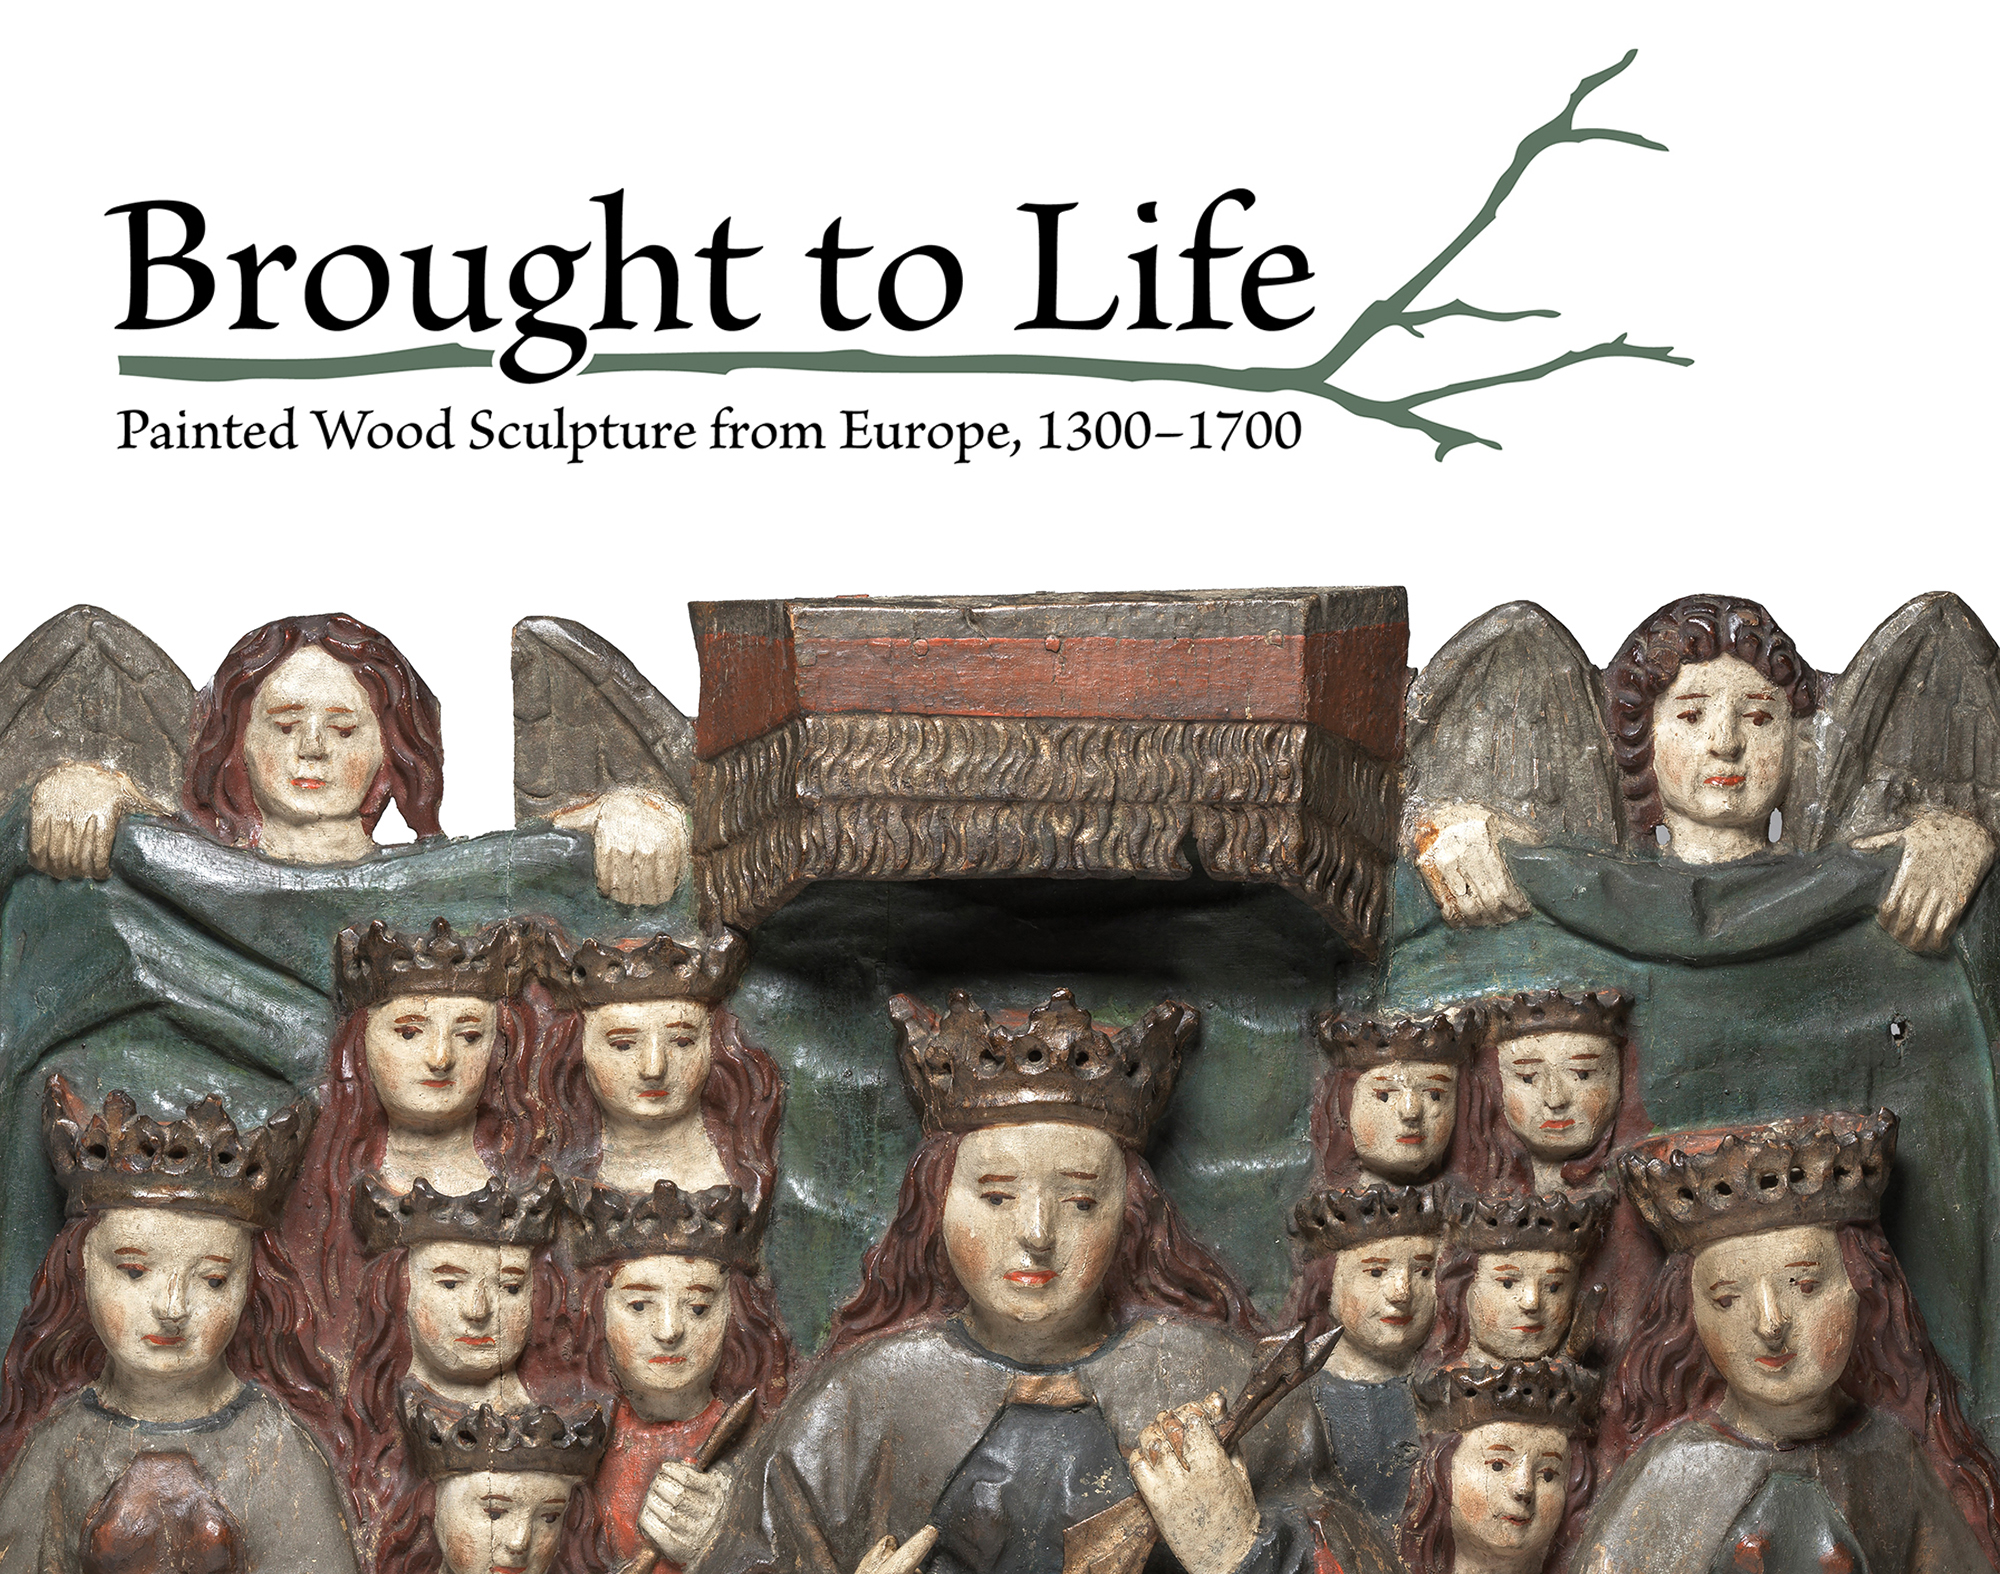 Brought to Life logo text with green branch and a detail of a polychrome piece with many angels with the same face